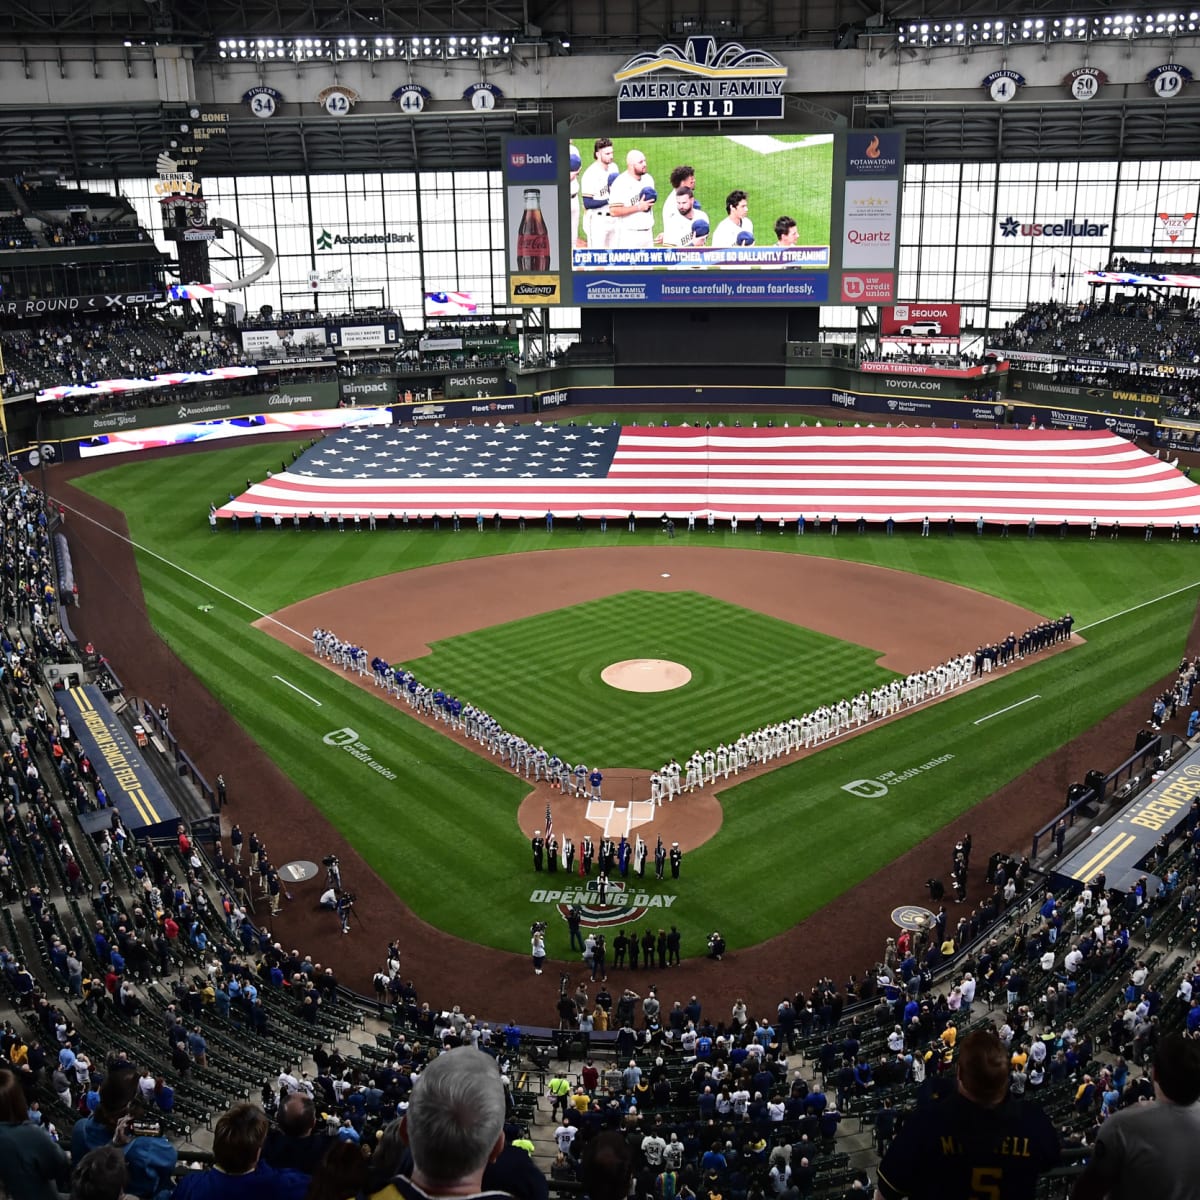 MLB on FOX - The Milwaukee Brewers just revealed their new